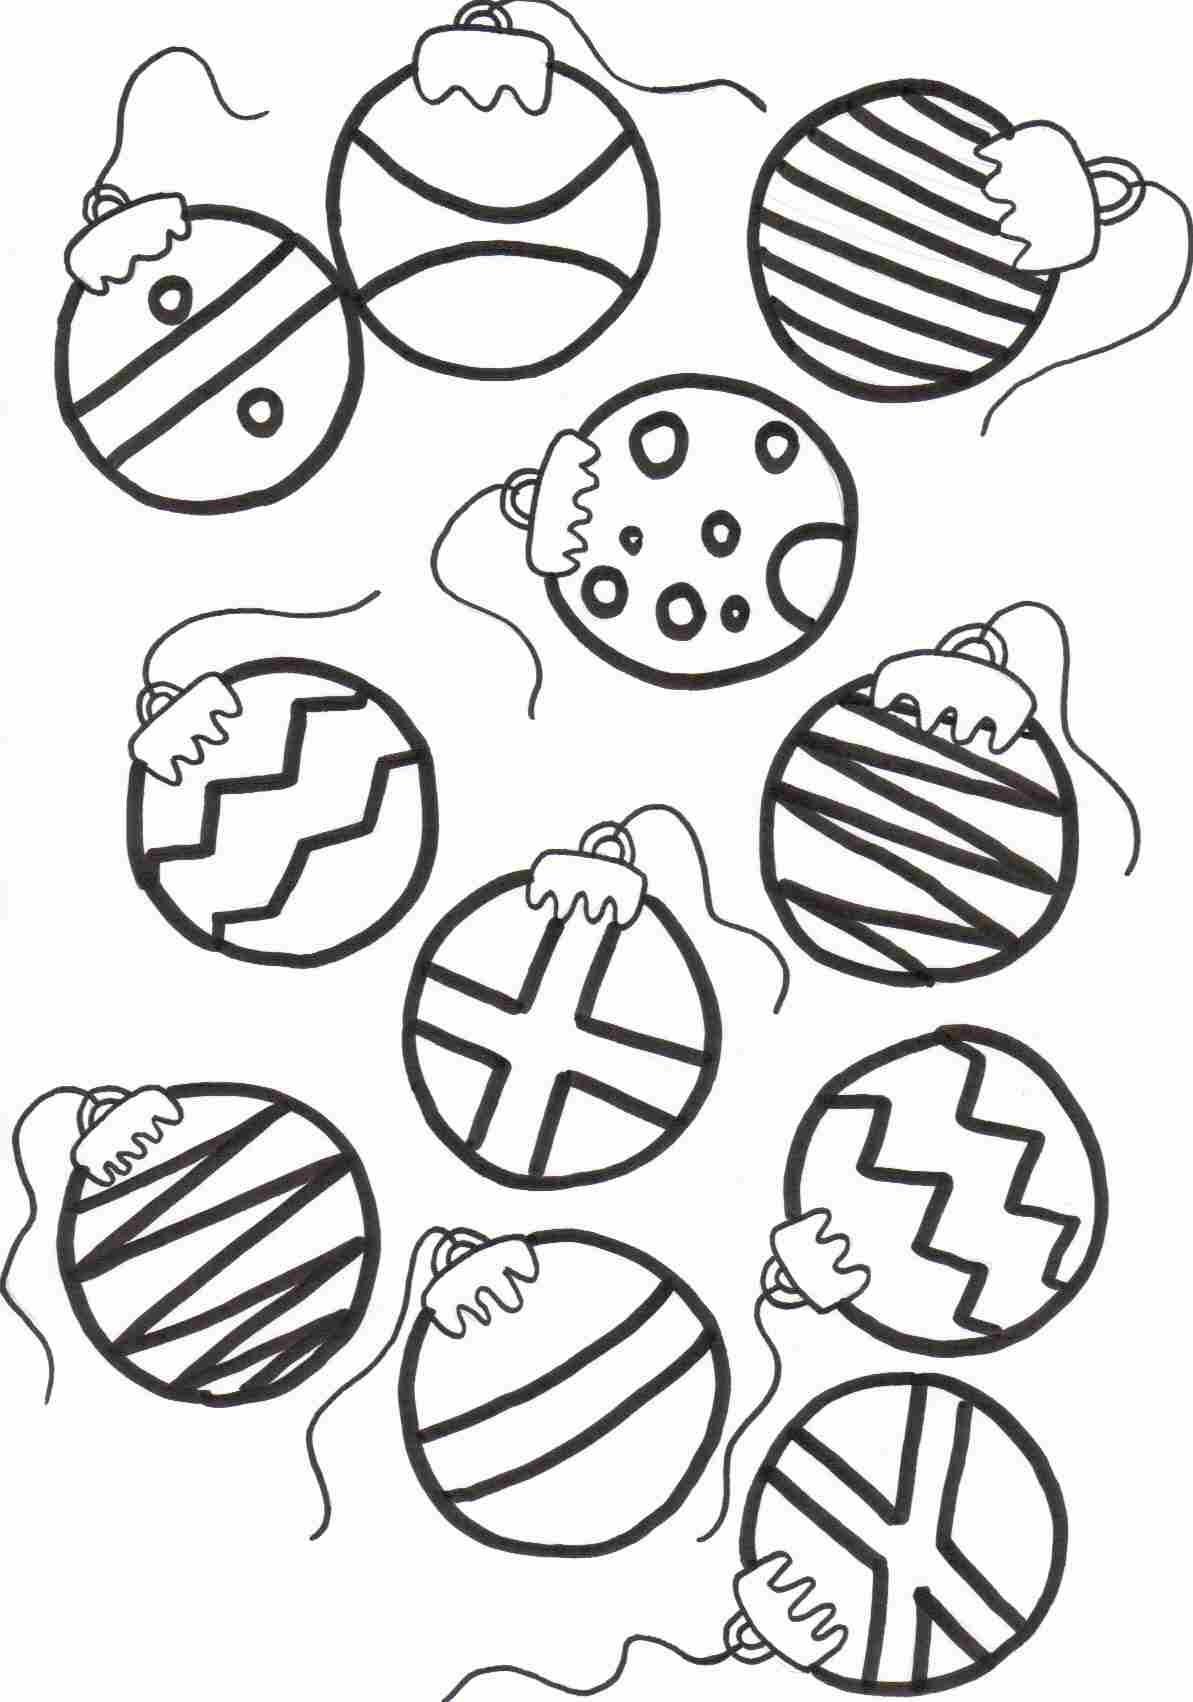 Christmas Ornaments Coloring Pages Printable - Coloring Home - Free Printable Ornaments To Color